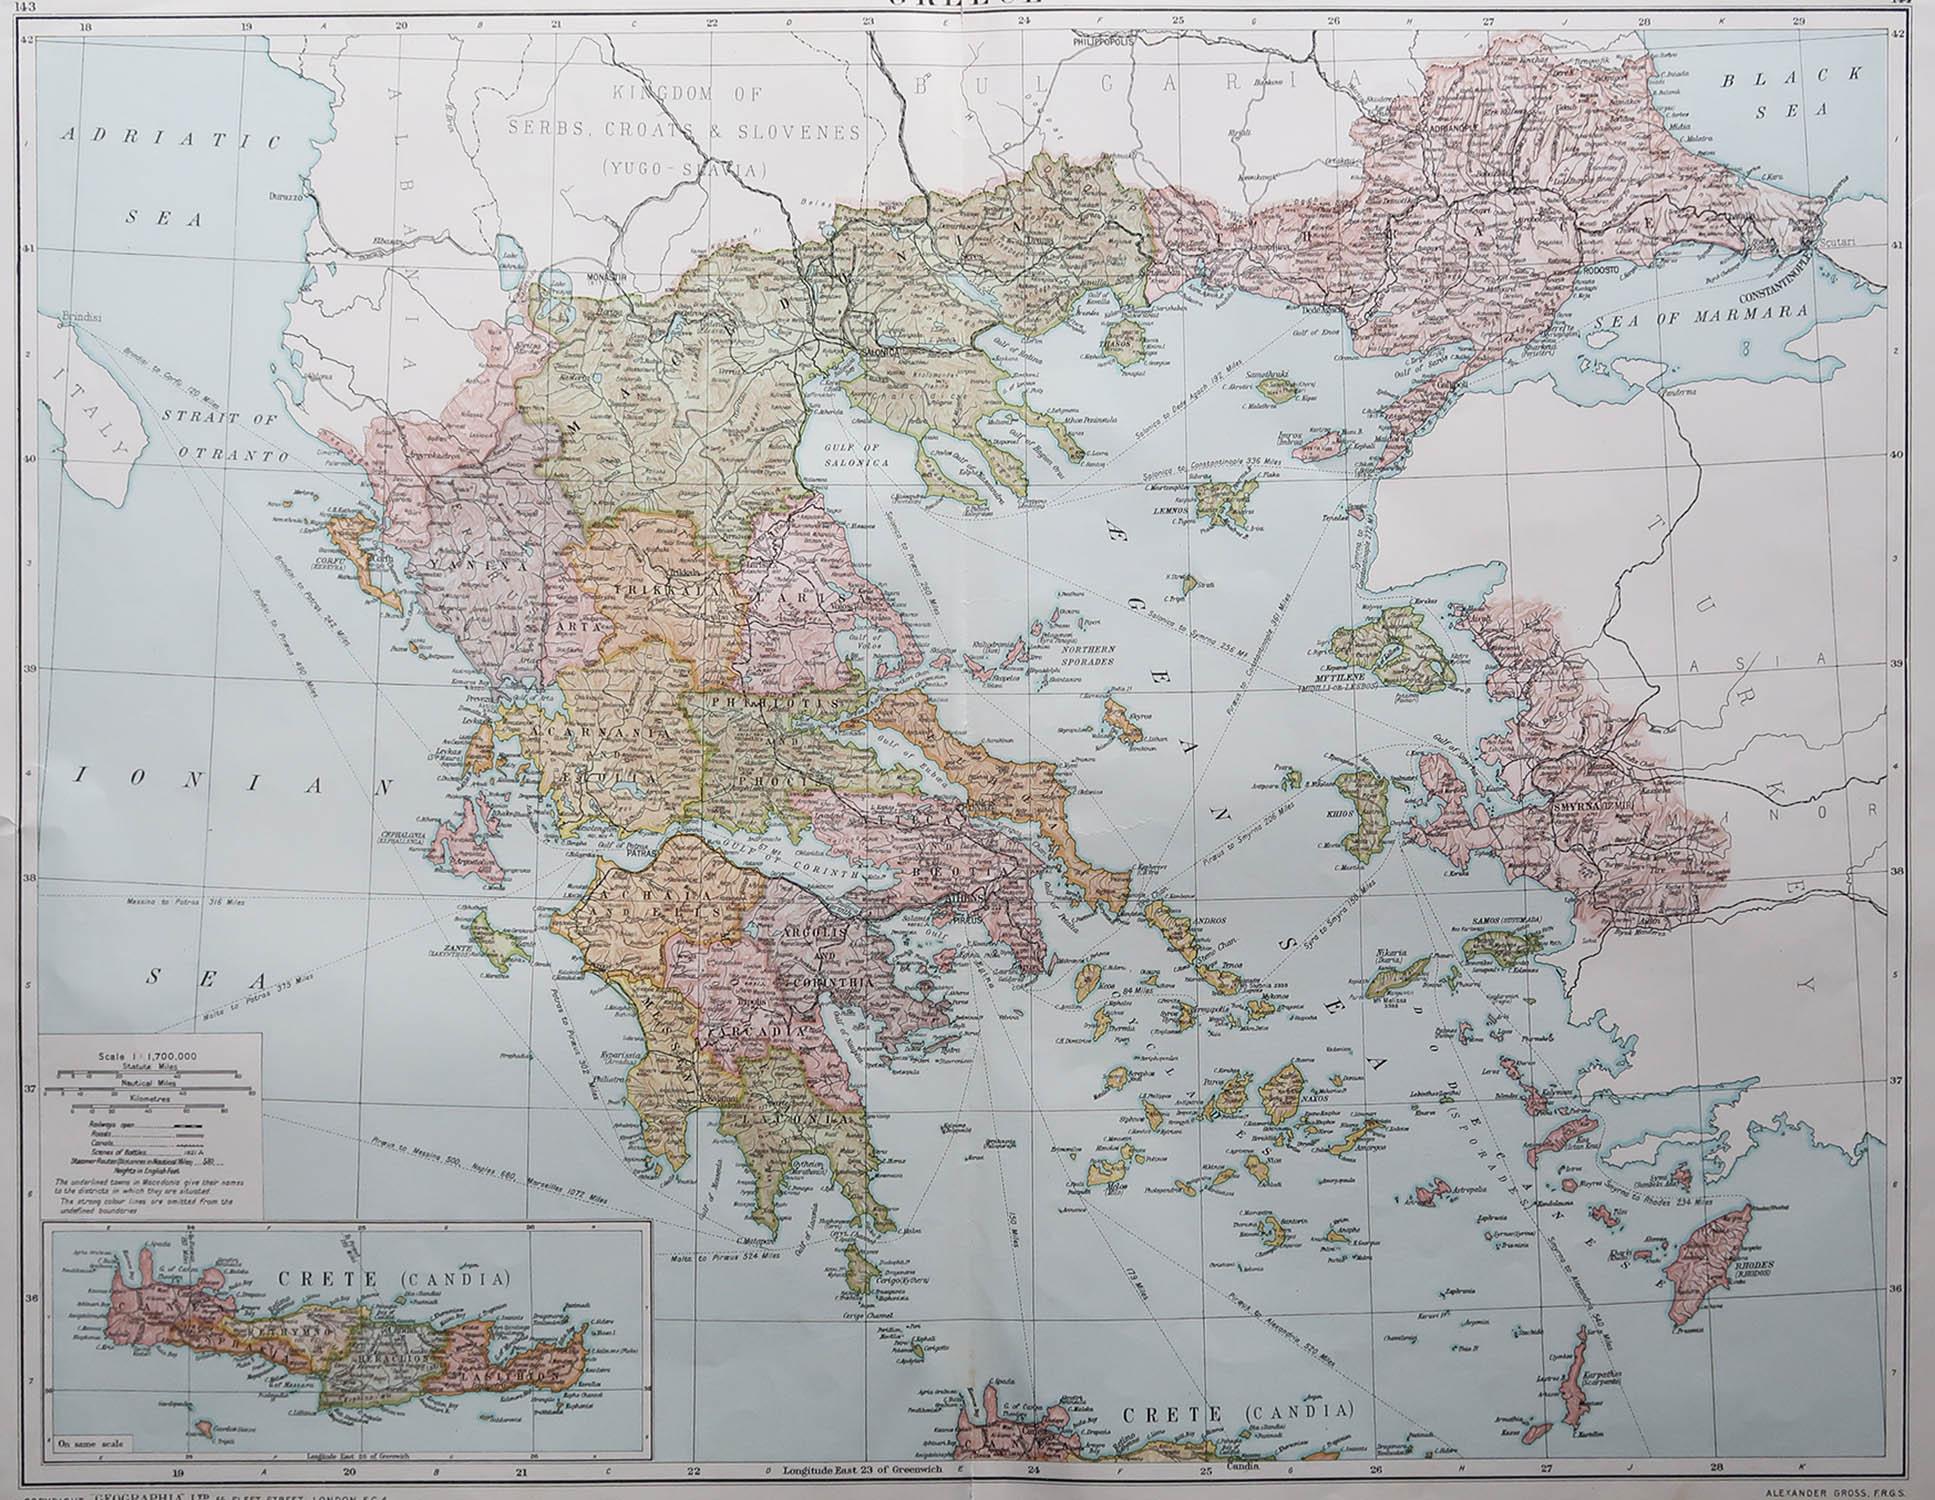 Great map of Greece

Original color.

Good condition 

Published by Alexander Gross

Unframed.








